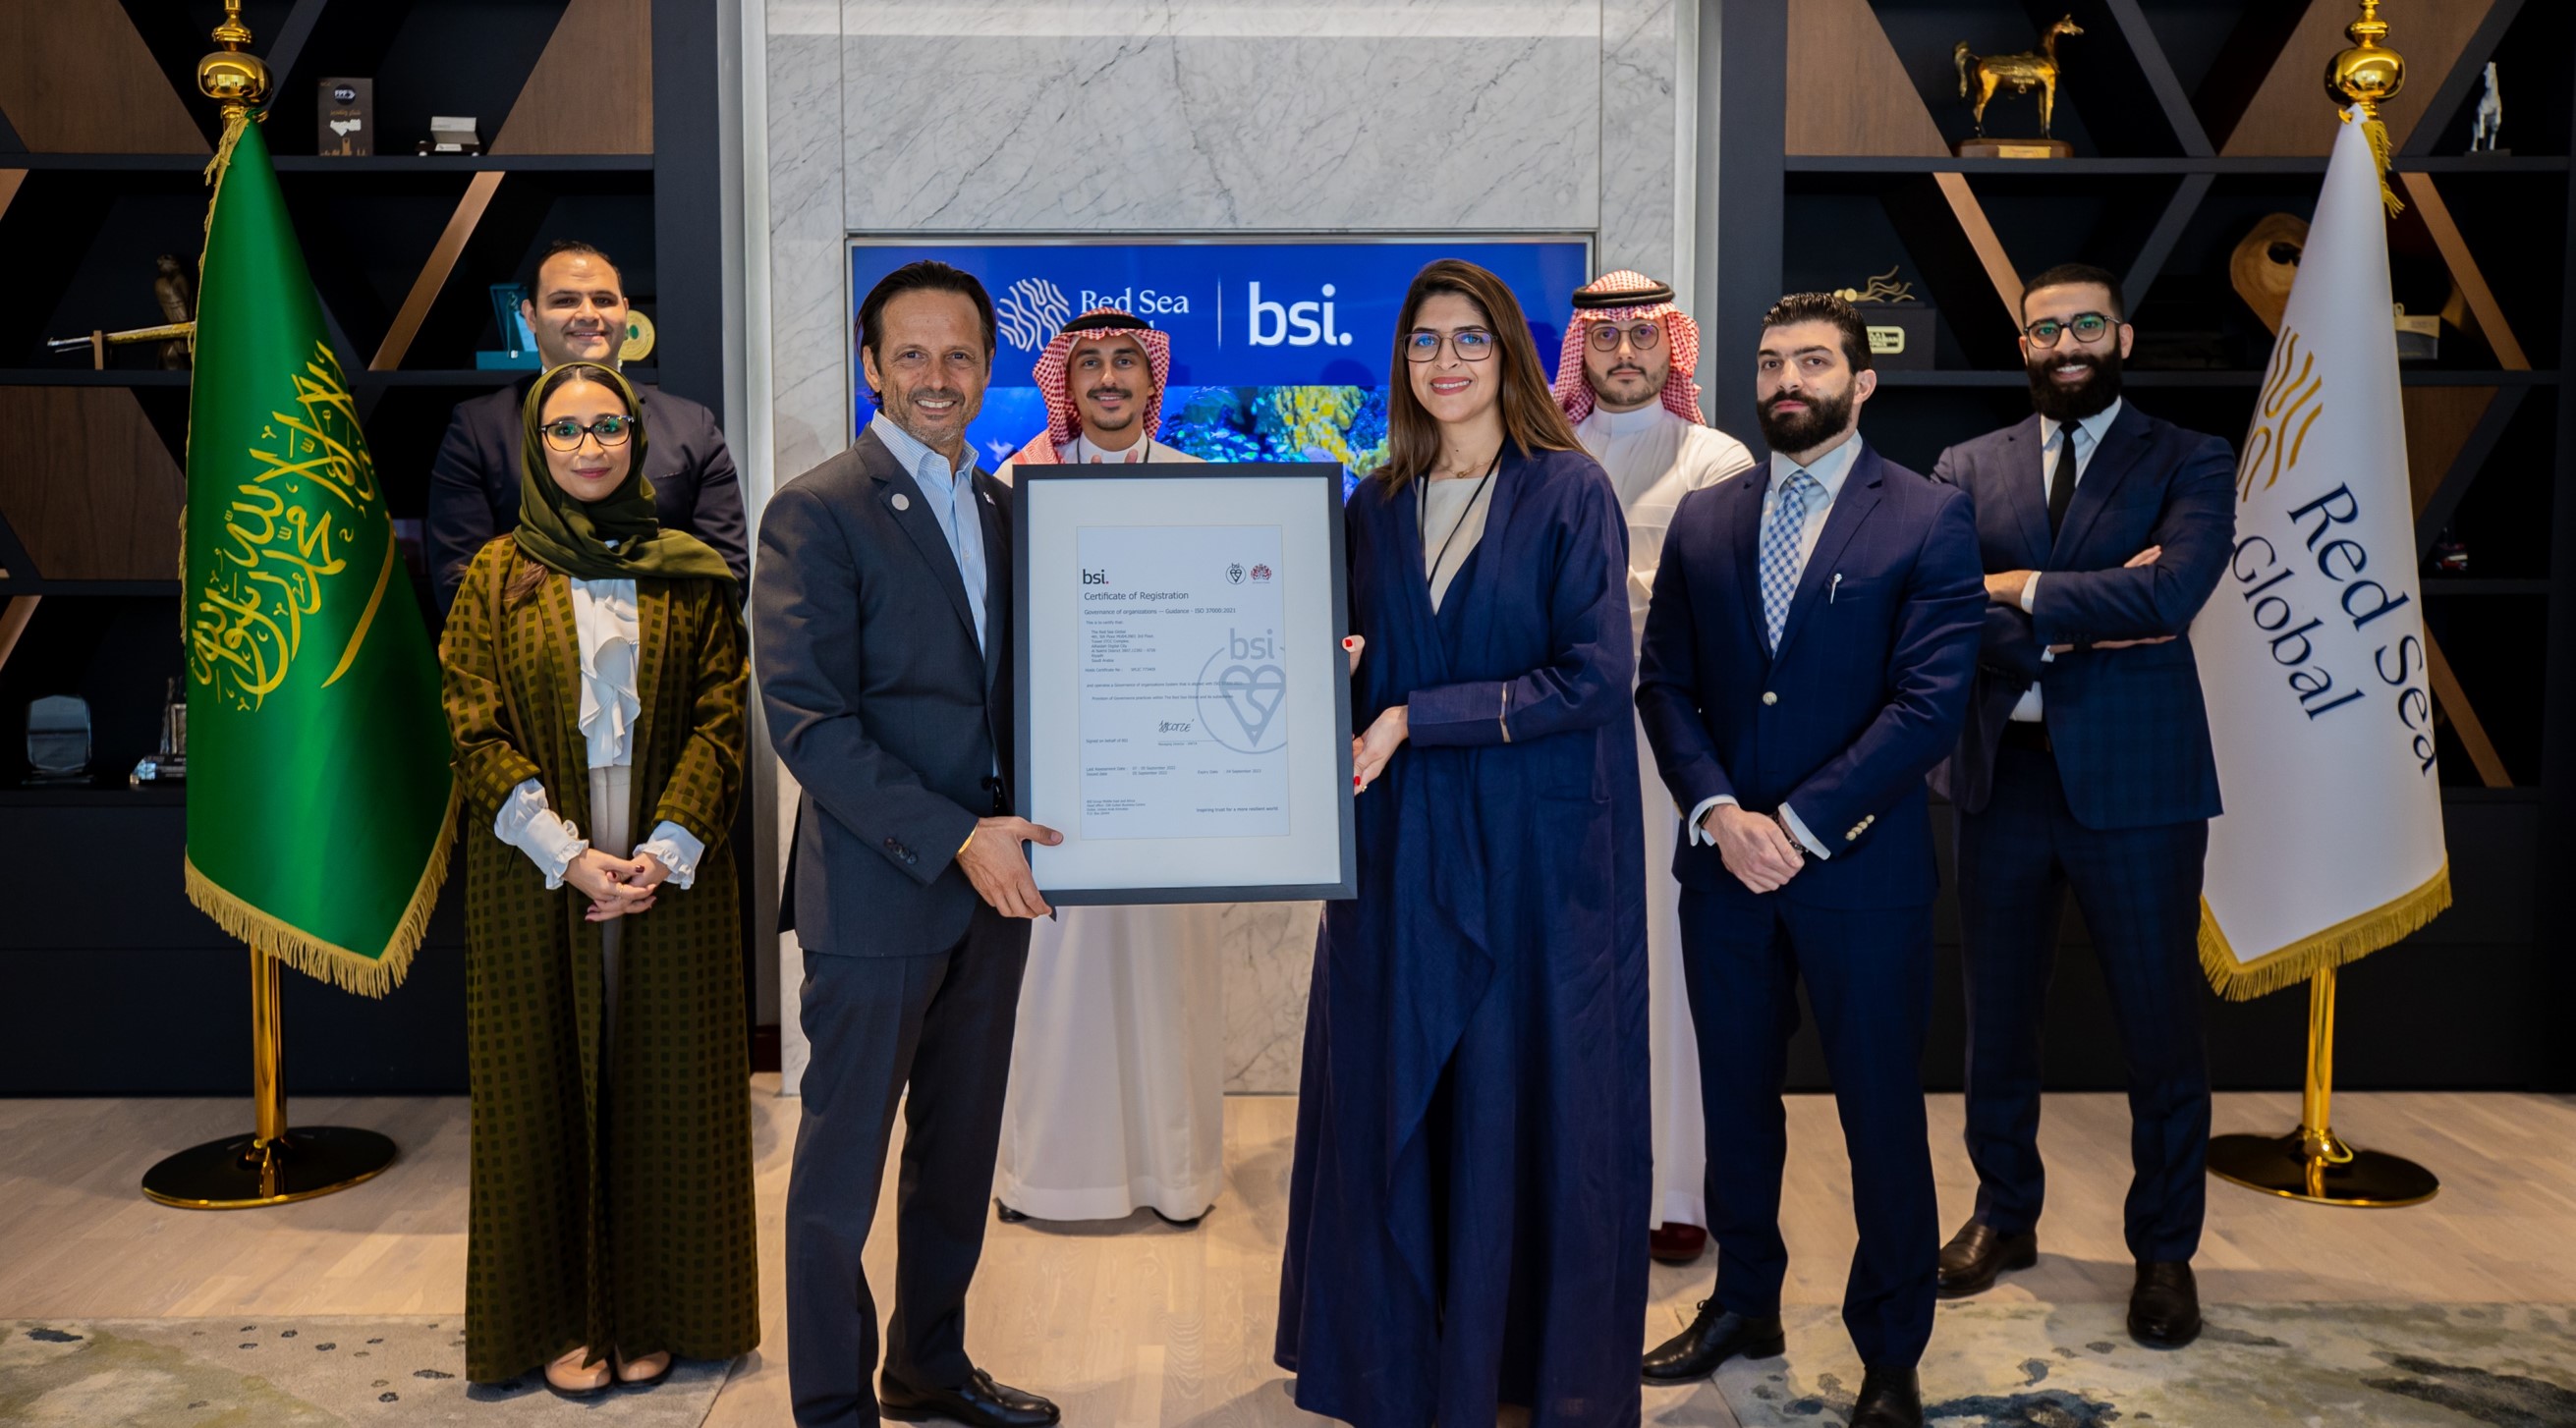 RSG Becomes First Saudi Company to Achieve Standard for Good Governance